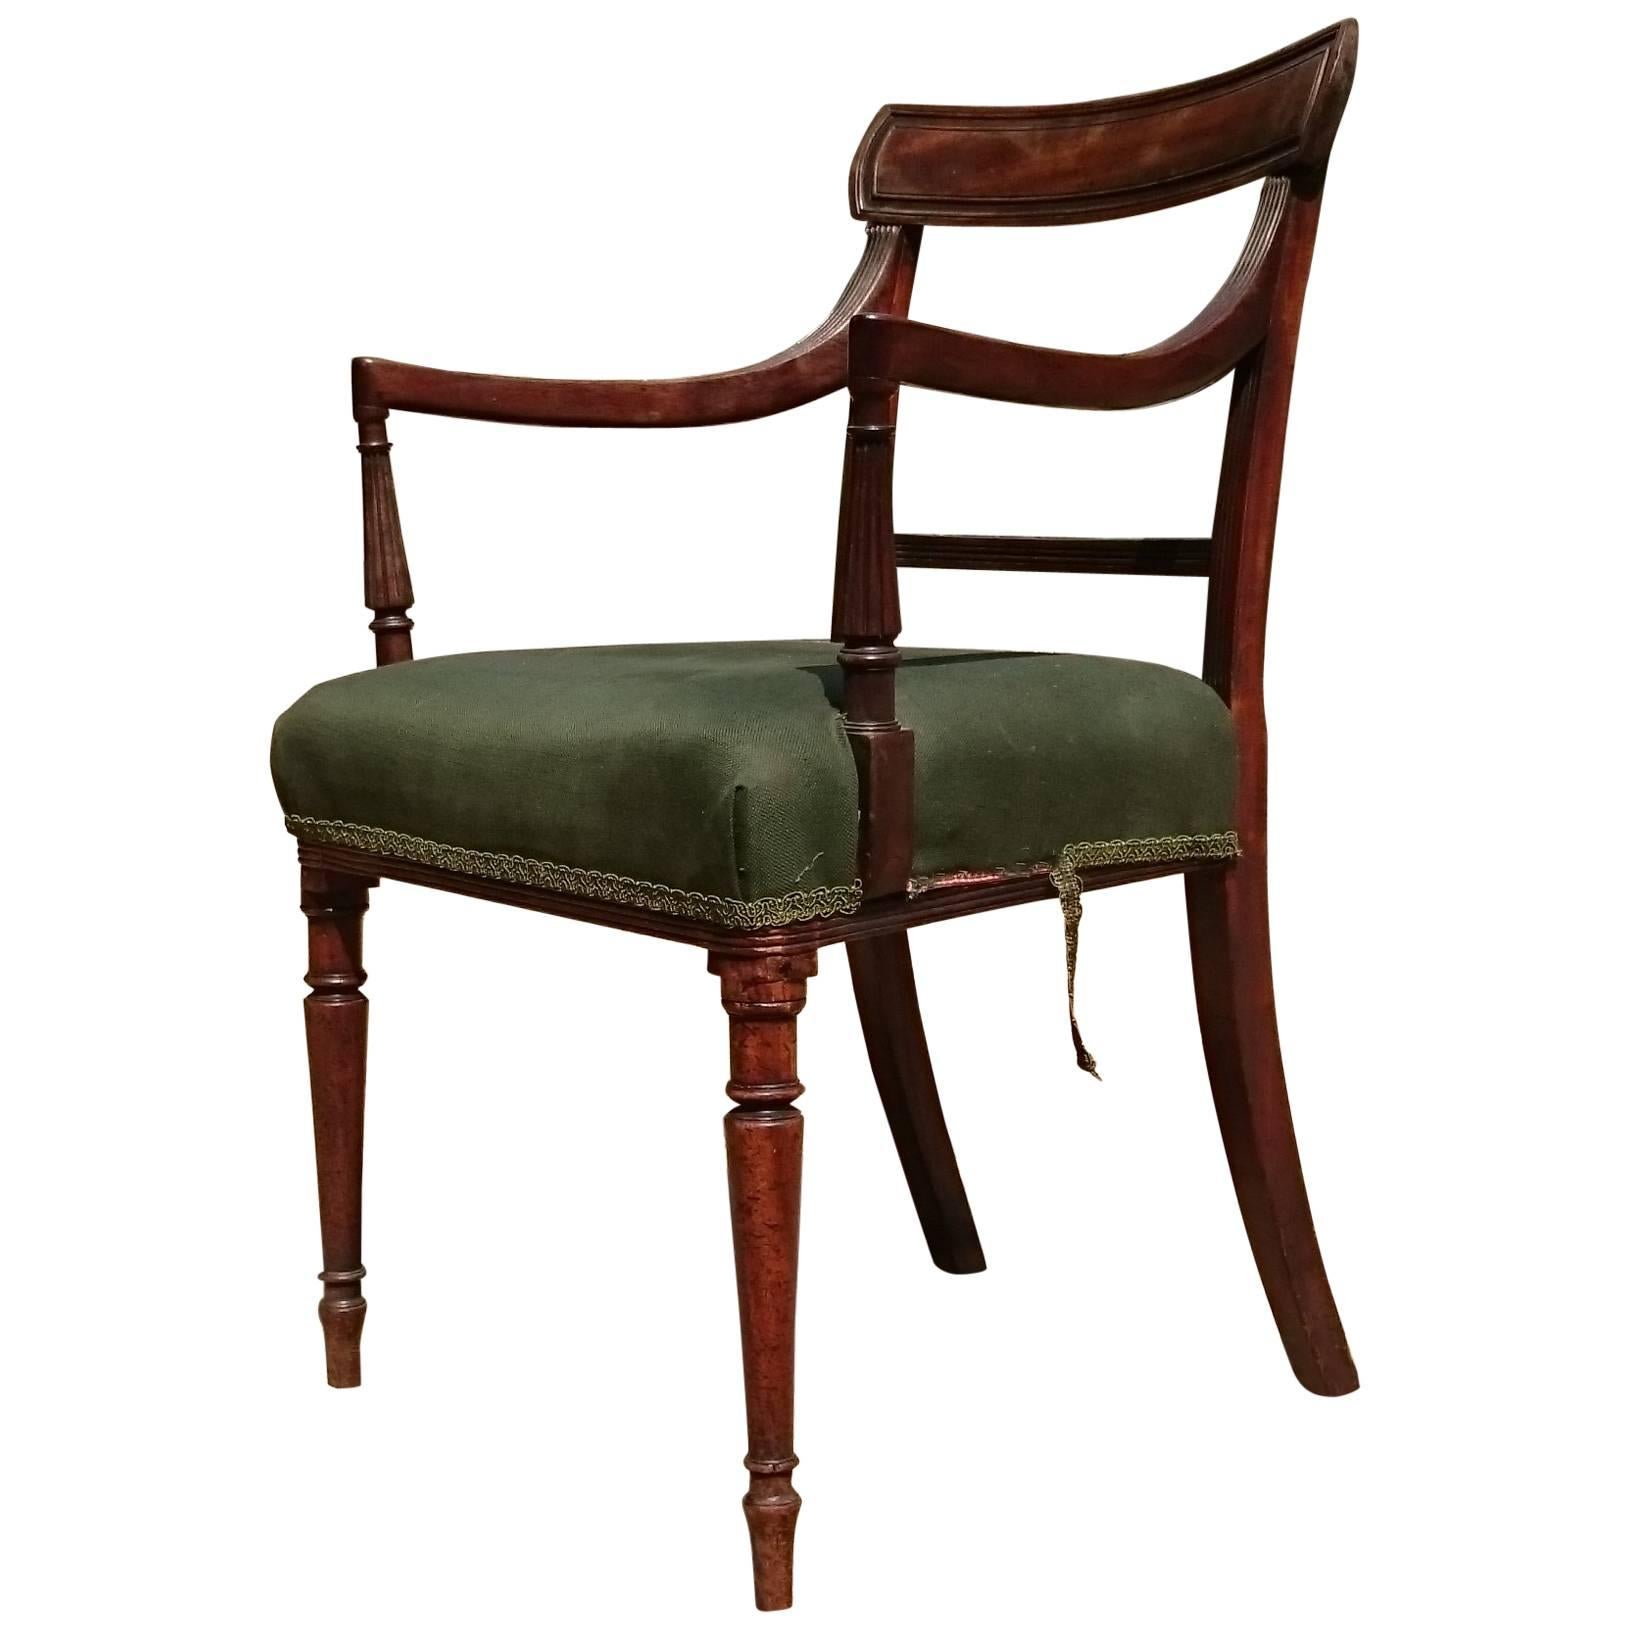 Early 19th Century Mahogany George III Period Antique Armchair or Desk Chair